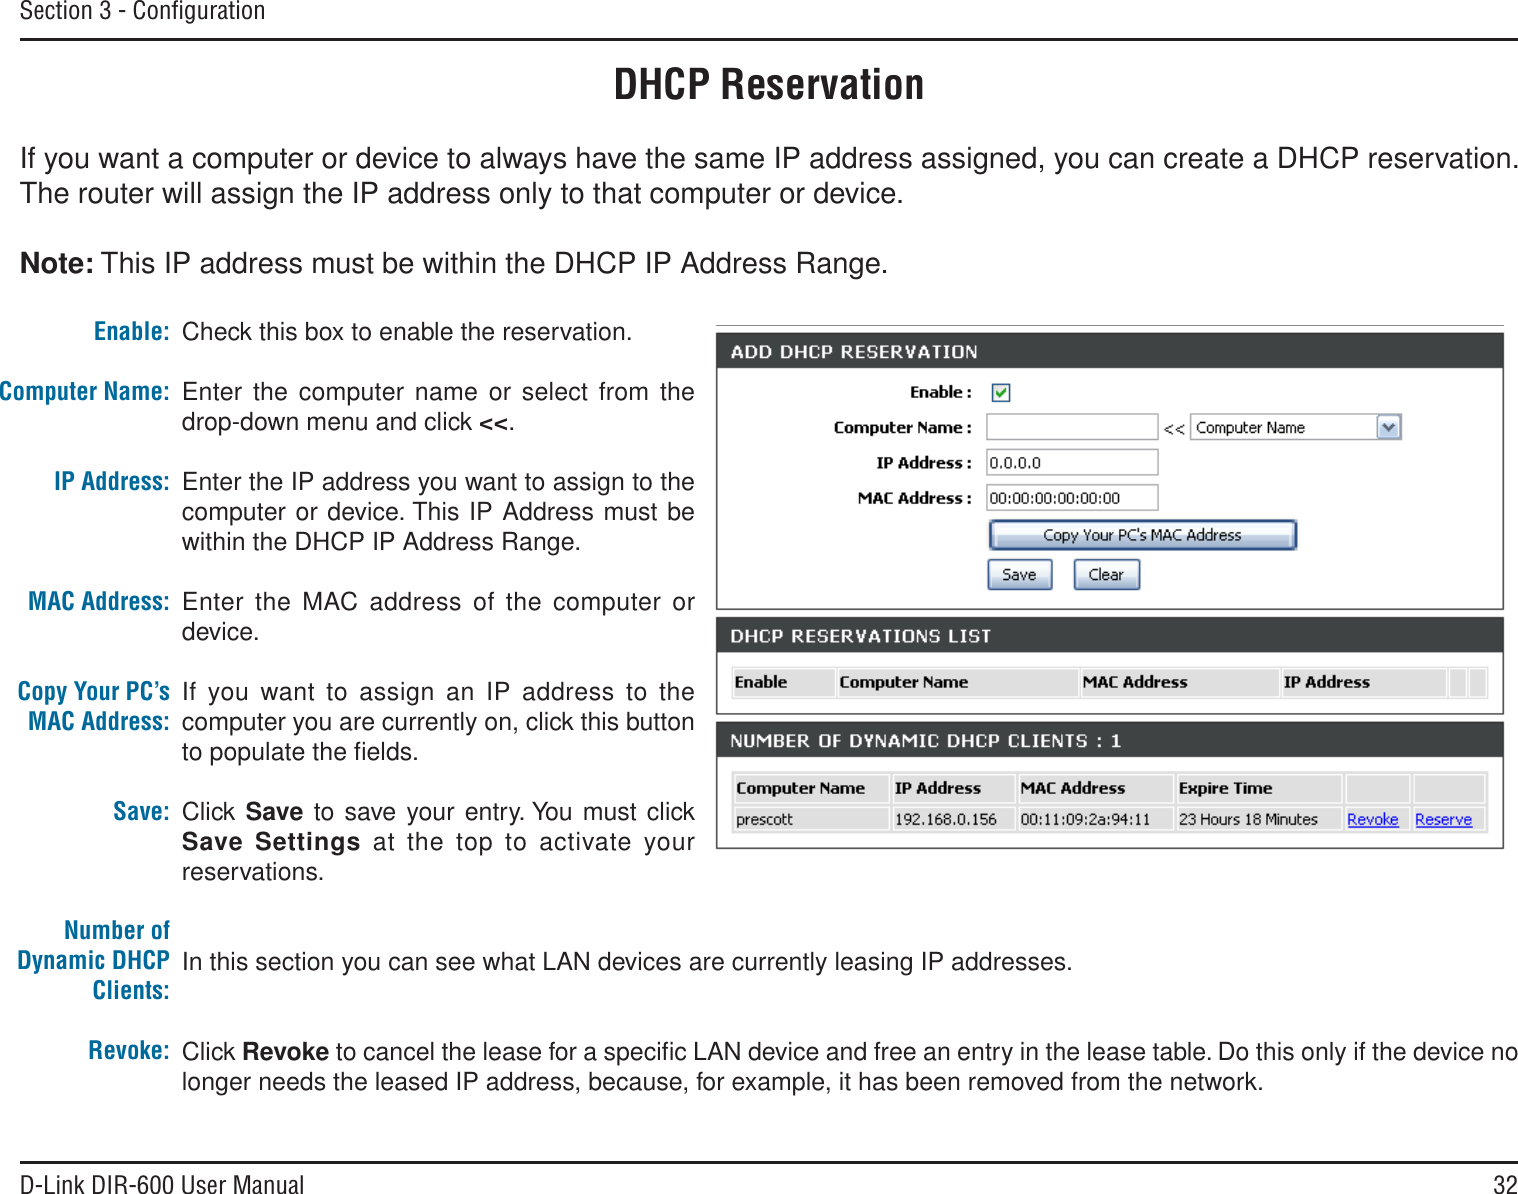 32D-Link DIR-600 User ManualSection 3 - ConﬁgurationDHCP ReservationIf you want a computer or device to always have the same IP address assigned, you can create a DHCP reservation. The router will assign the IP address only to that computer or device. Note: This IP address must be within the DHCP IP Address Range.Check this box to enable the reservation.Enter the computer name or select from the drop-down menu and click &lt;&lt;.Enter the IP address you want to assign to the computer or device. This IP Address must be within the DHCP IP Address Range.Enter the MAC address of the computer or device.If you want to assign an IP address to the computer you are currently on, click this button to populate the ﬁelds. Click Save to save your entry. You must click Save Settings at the top to activate your reservations. In this section you can see what LAN devices are currently leasing IP addresses.Click Revoke to cancel the lease for a speciﬁc LAN device and free an entry in the lease table. Do this only if the device no longer needs the leased IP address, because, for example, it has been removed from the network.Enable:Computer Name:IP Address:MAC Address:Copy Your PC’s MAC Address:Save:Number of Dynamic DHCP Clients:Revoke: